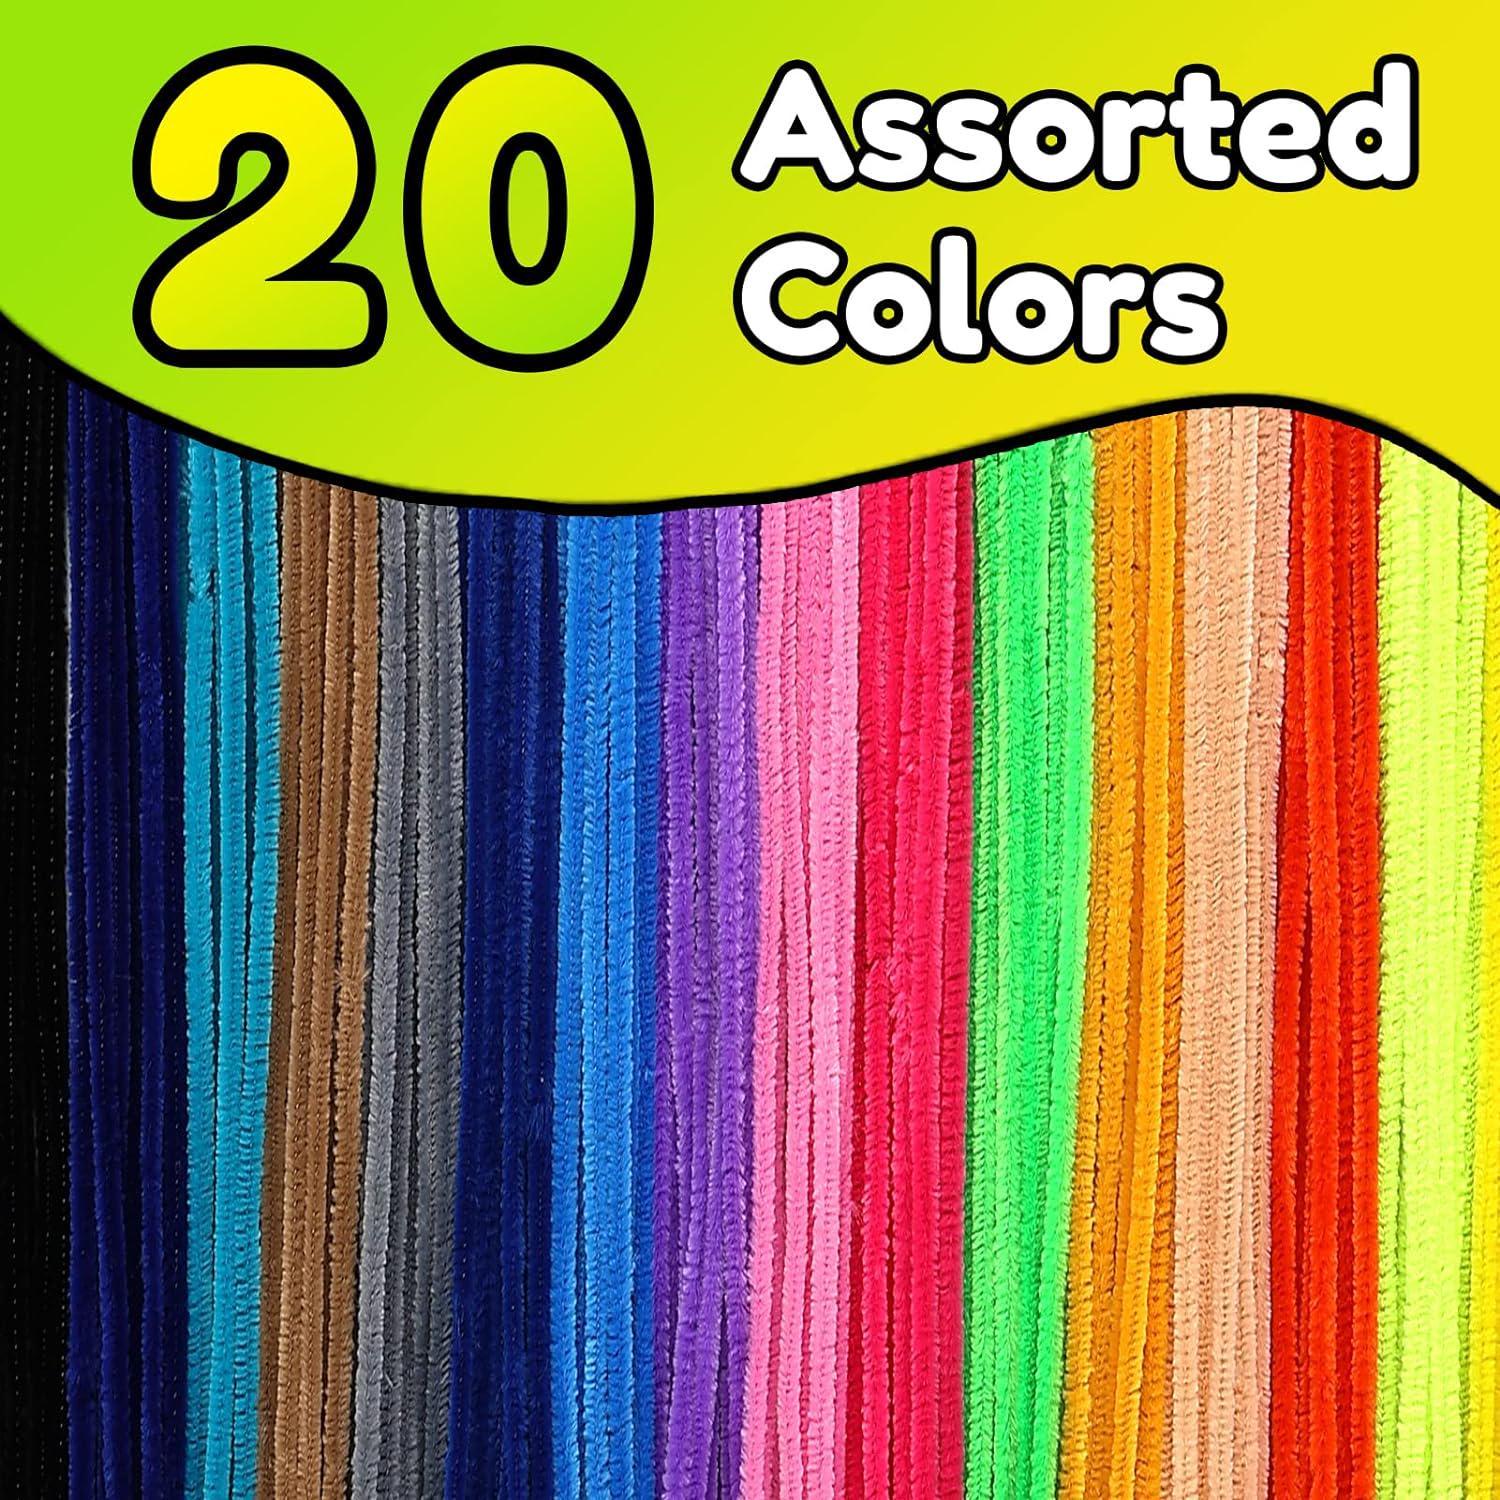 Pipe Cleaners, Pipe Cleaners for Crafts (200Pcs 20 Multi-Colored),12 Inch  Long P